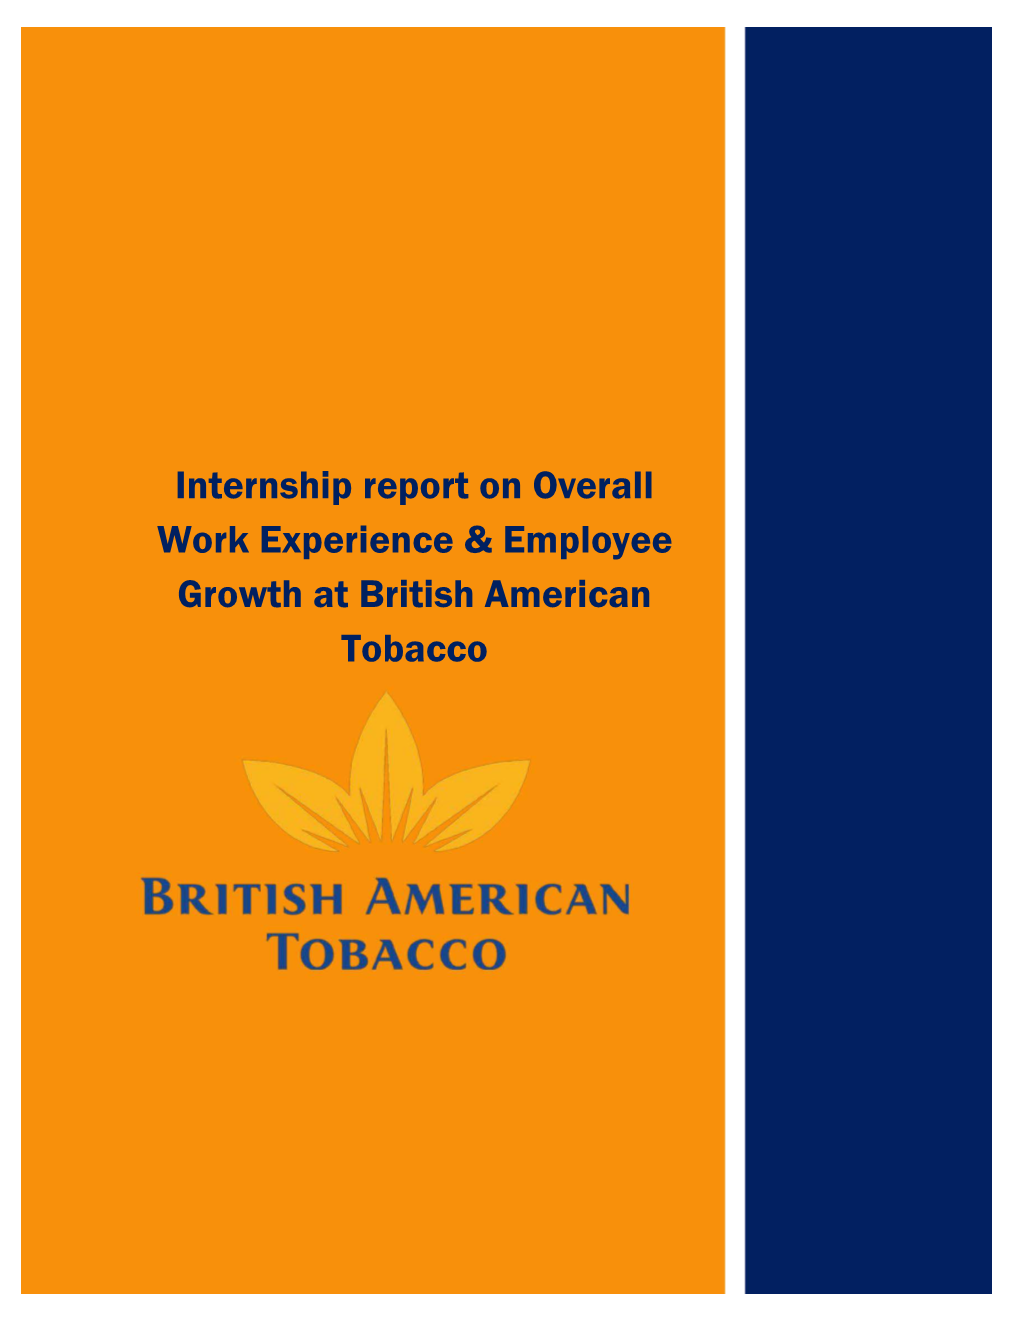 Internship Report on Overall Work Experience & Employee Growth At